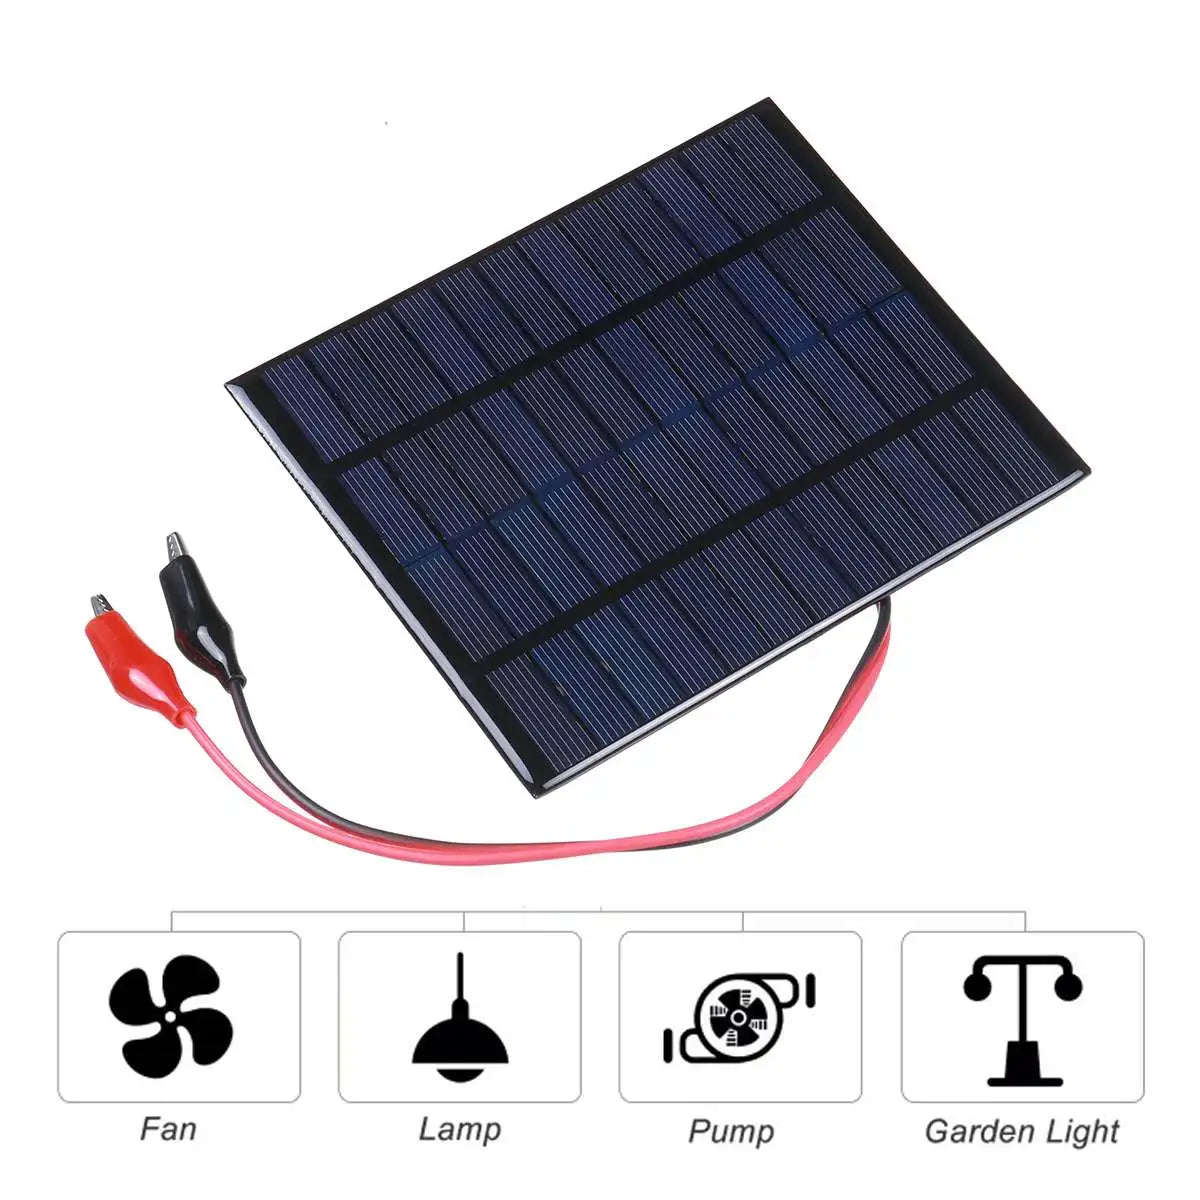 20W Solar Panel, Efficient polycrystalline silicon solar cells convert sunlight into usable electricity, providing free and sustainable power.